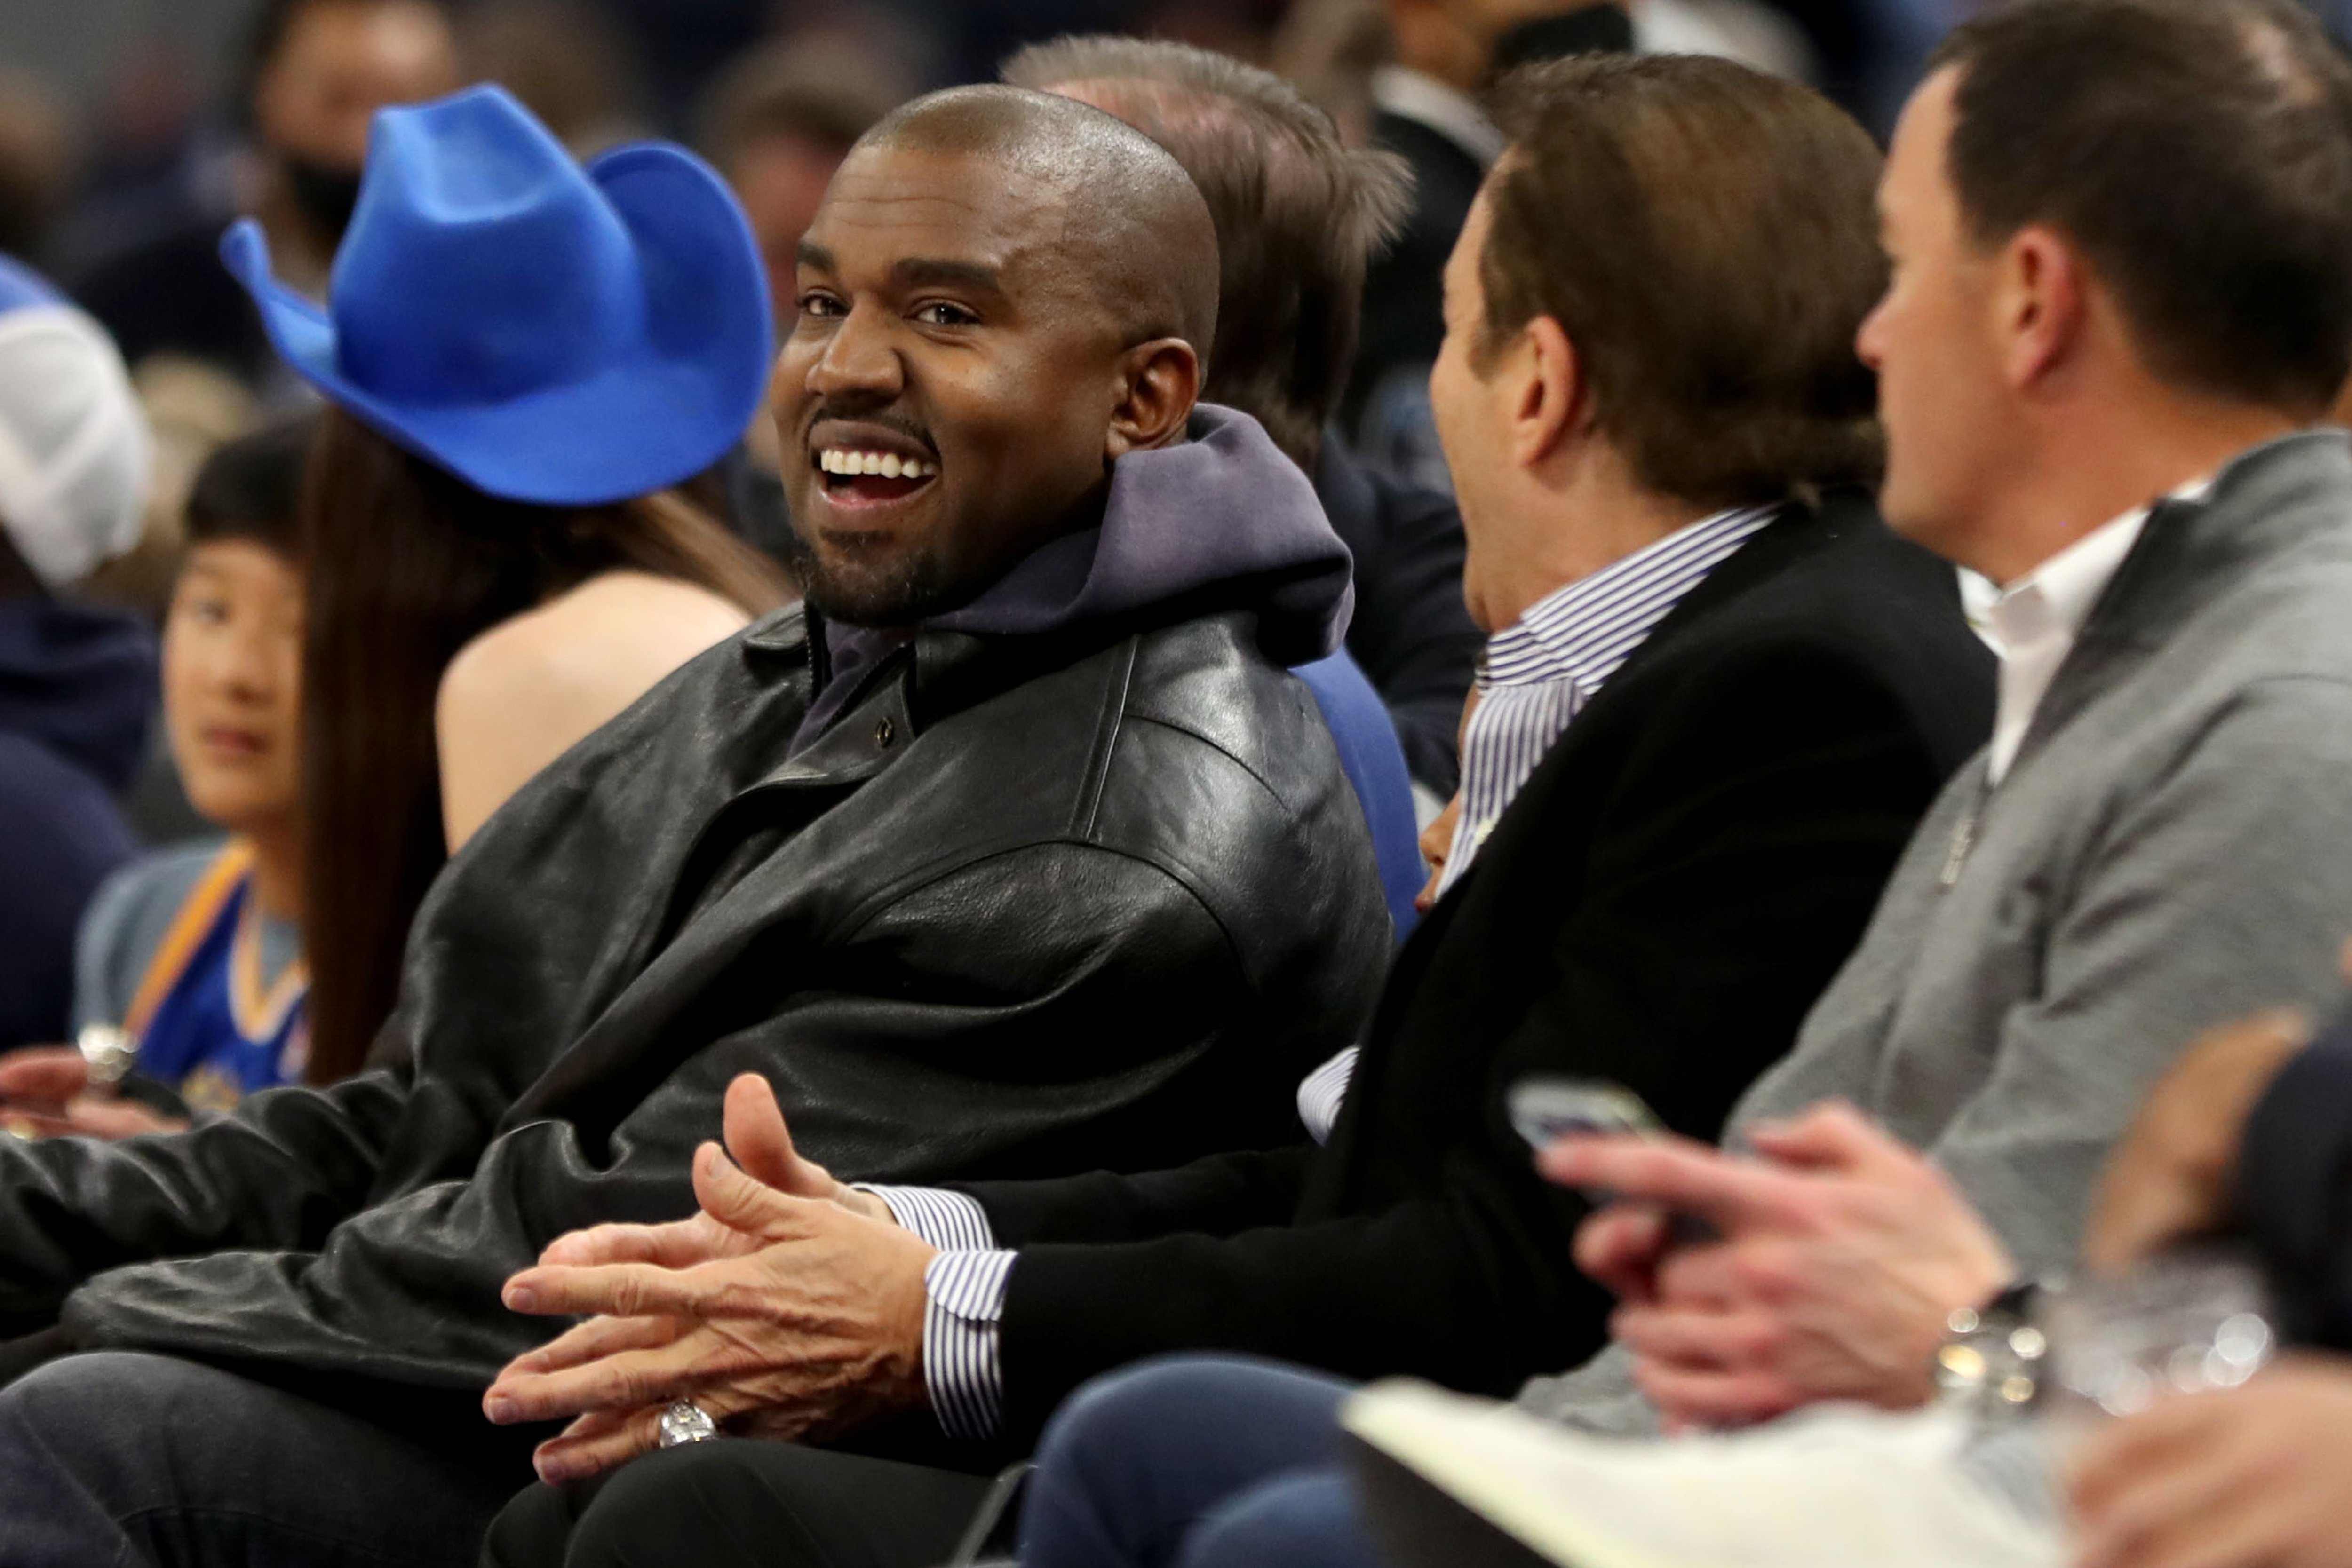 Kanye West at the Golden State Warriors vs. Boston Celtics game March 16, 2022 | Source: Getty Images